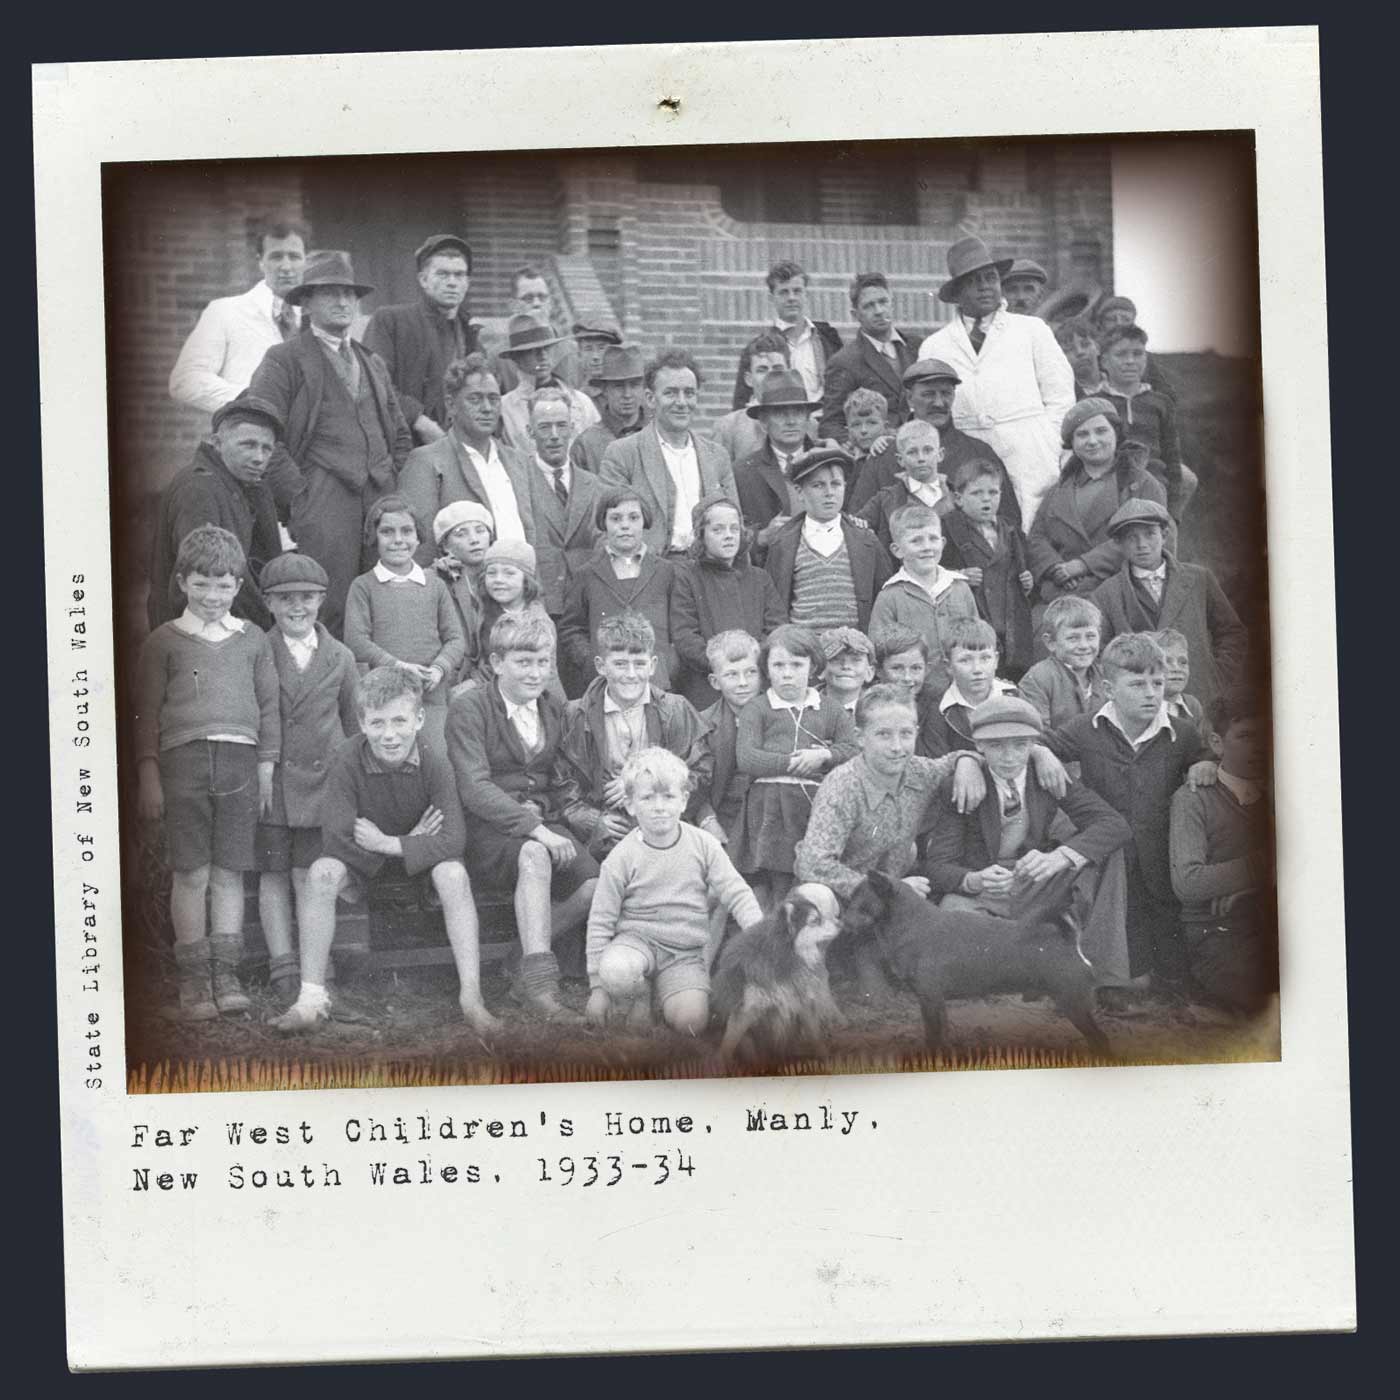 A Polaroid image showing a group of men and children gathered on the steps of a brick building. 'Far West Children's Home, Manly, New South Wales, 1933-34' is printed underneath the photo. 'State Library of New South Wales' is printed vertically on the left border. - click to view larger image